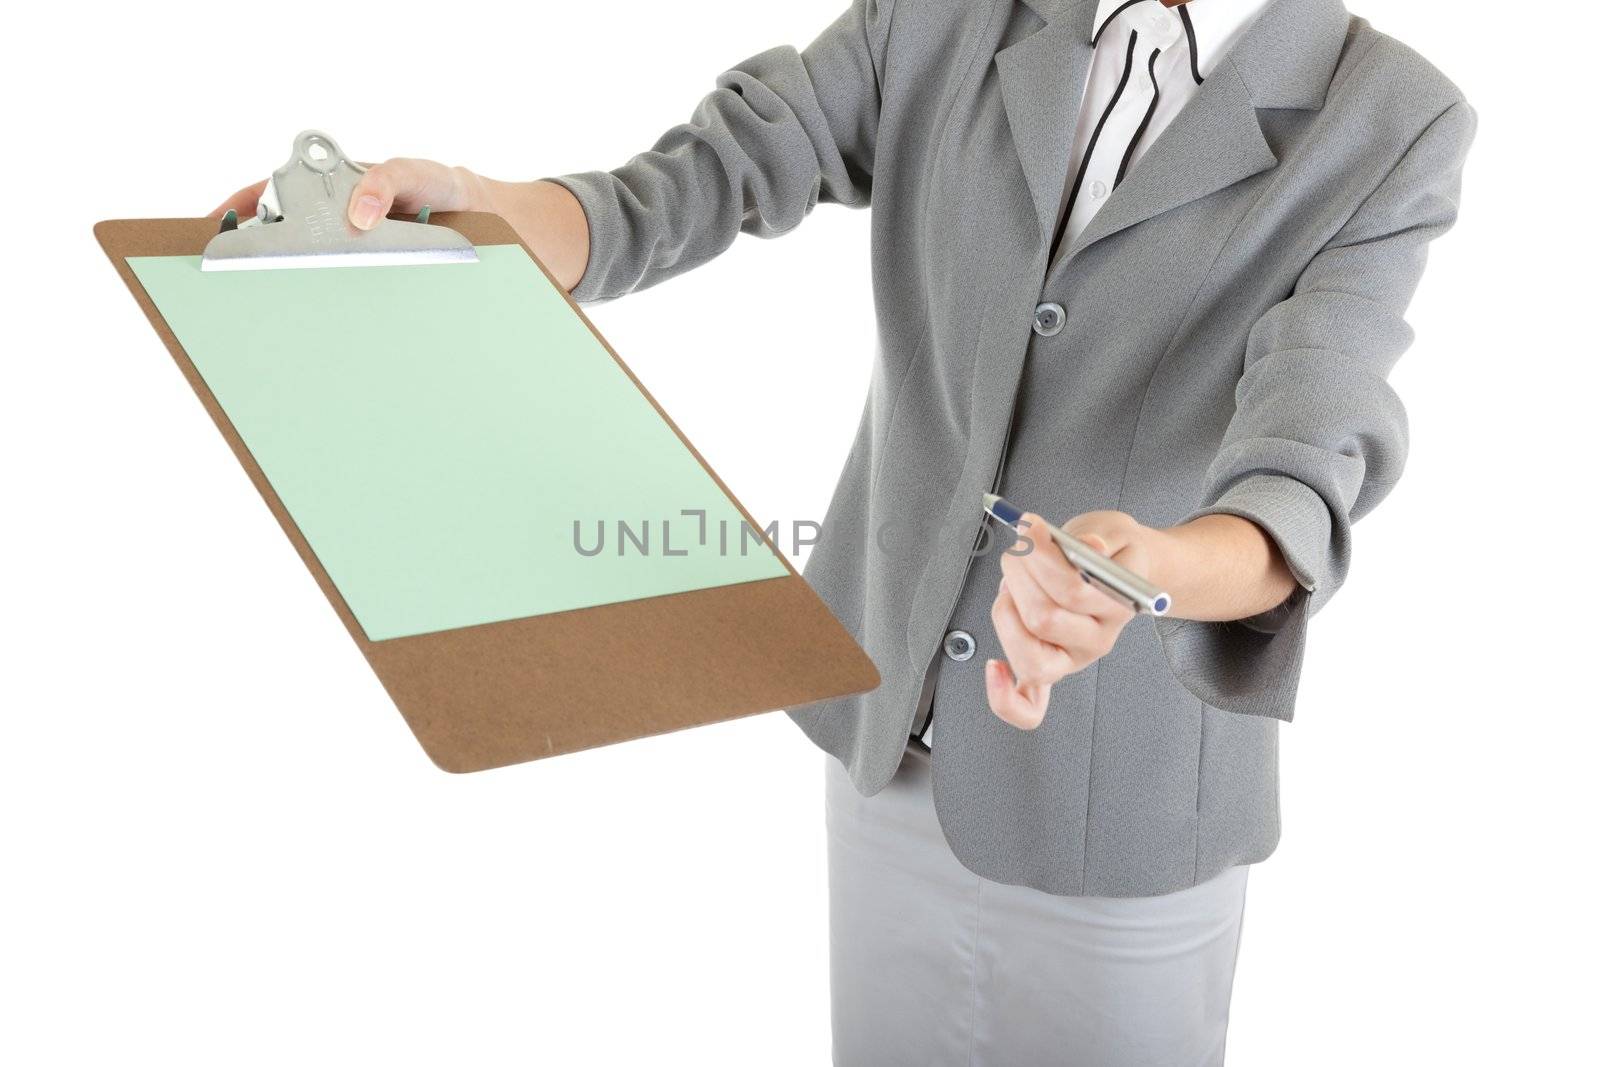 young girl in a gray business suit on white background